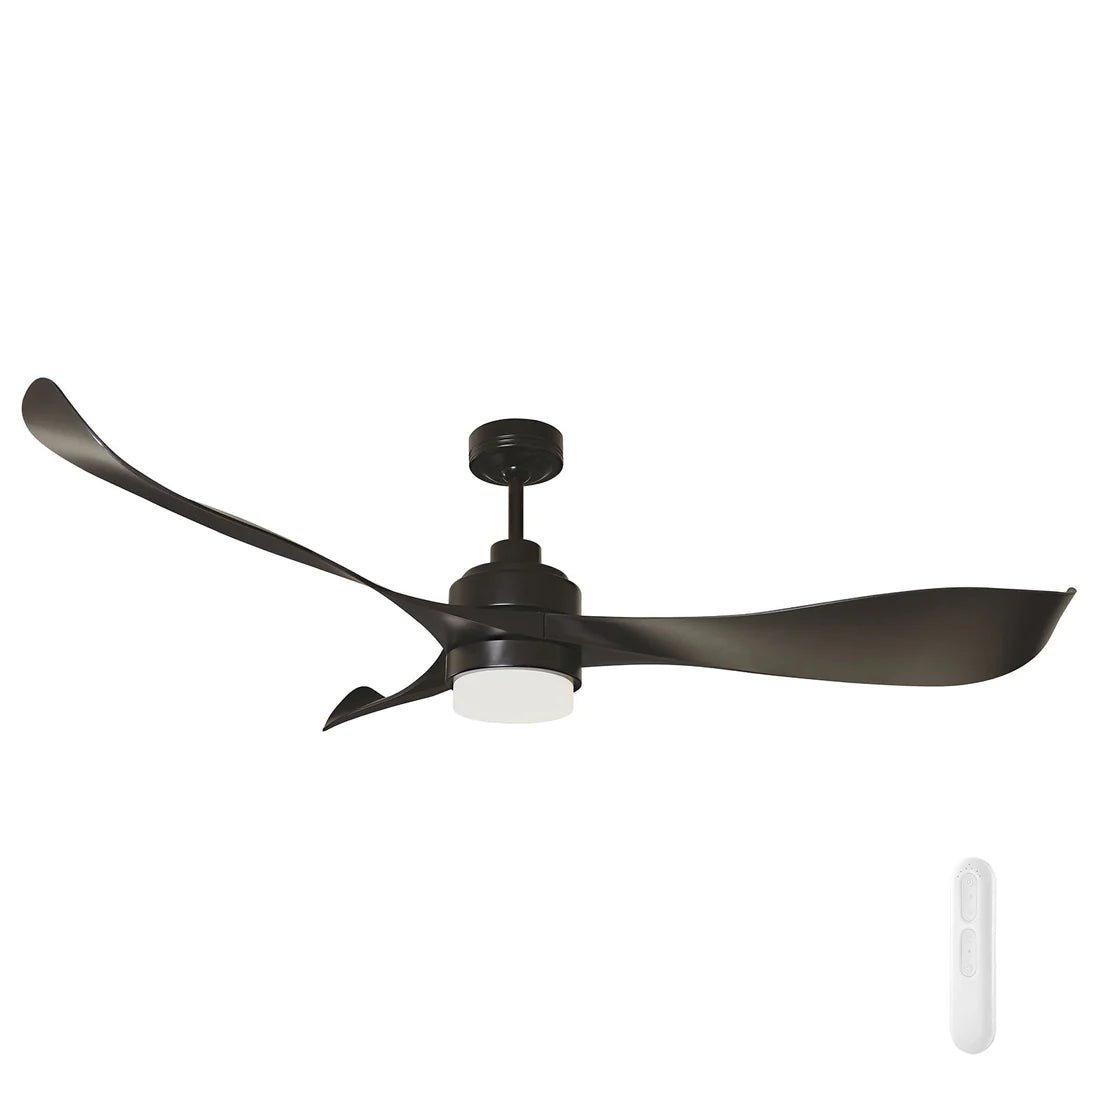 Mercator Eagle DC Ceiling Fans With LED Light And Remote Graphite - Mases LightingMercator